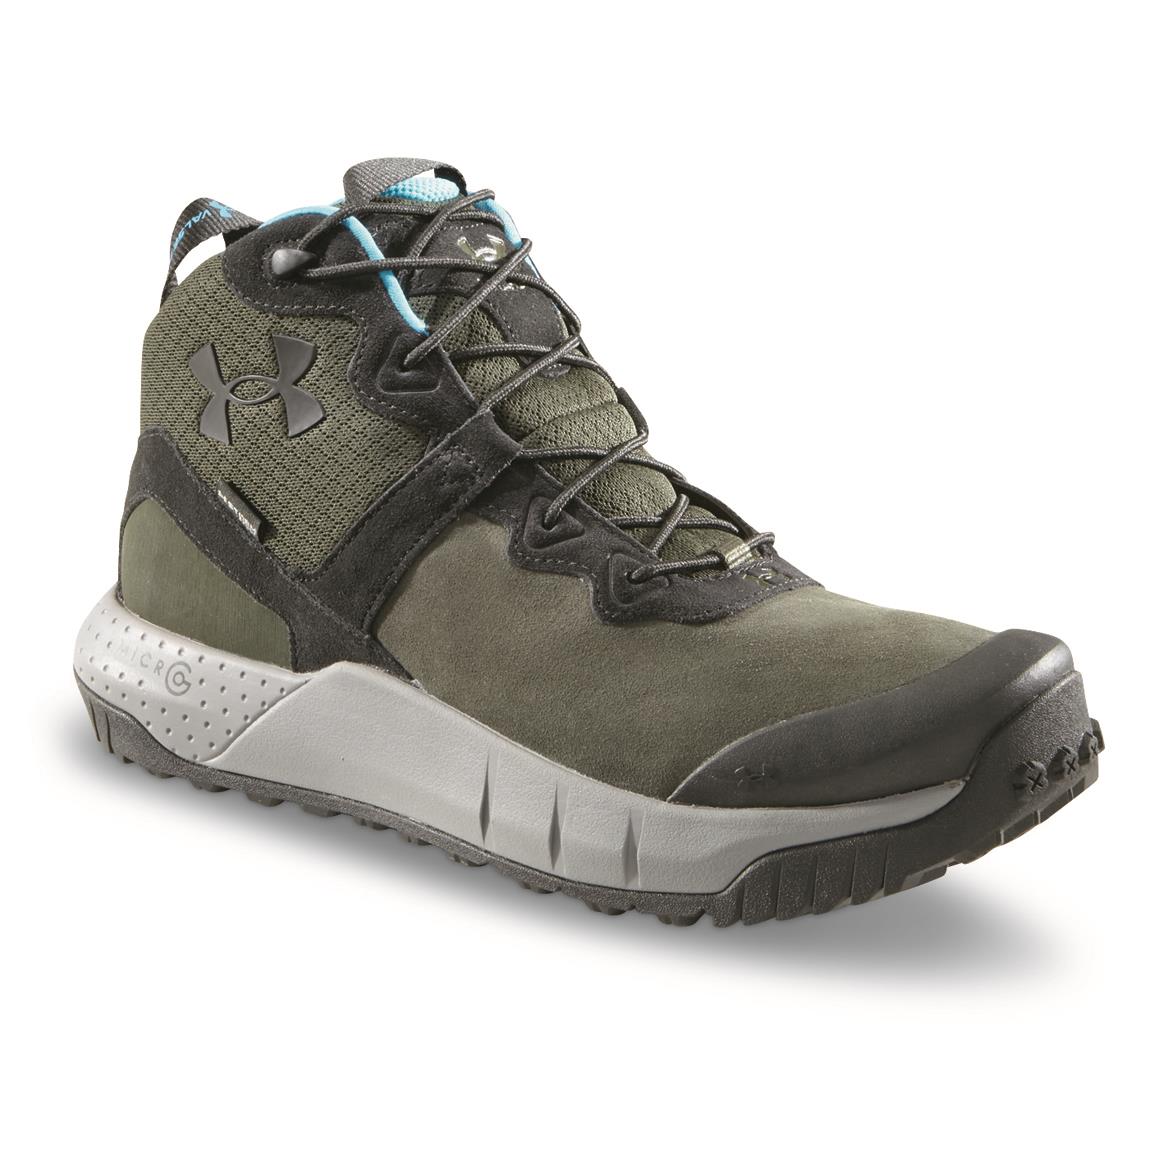 Men's Under Armour Micro G Valsetz Mid Tactical Boots 'Coyote Brown'  3023741 200